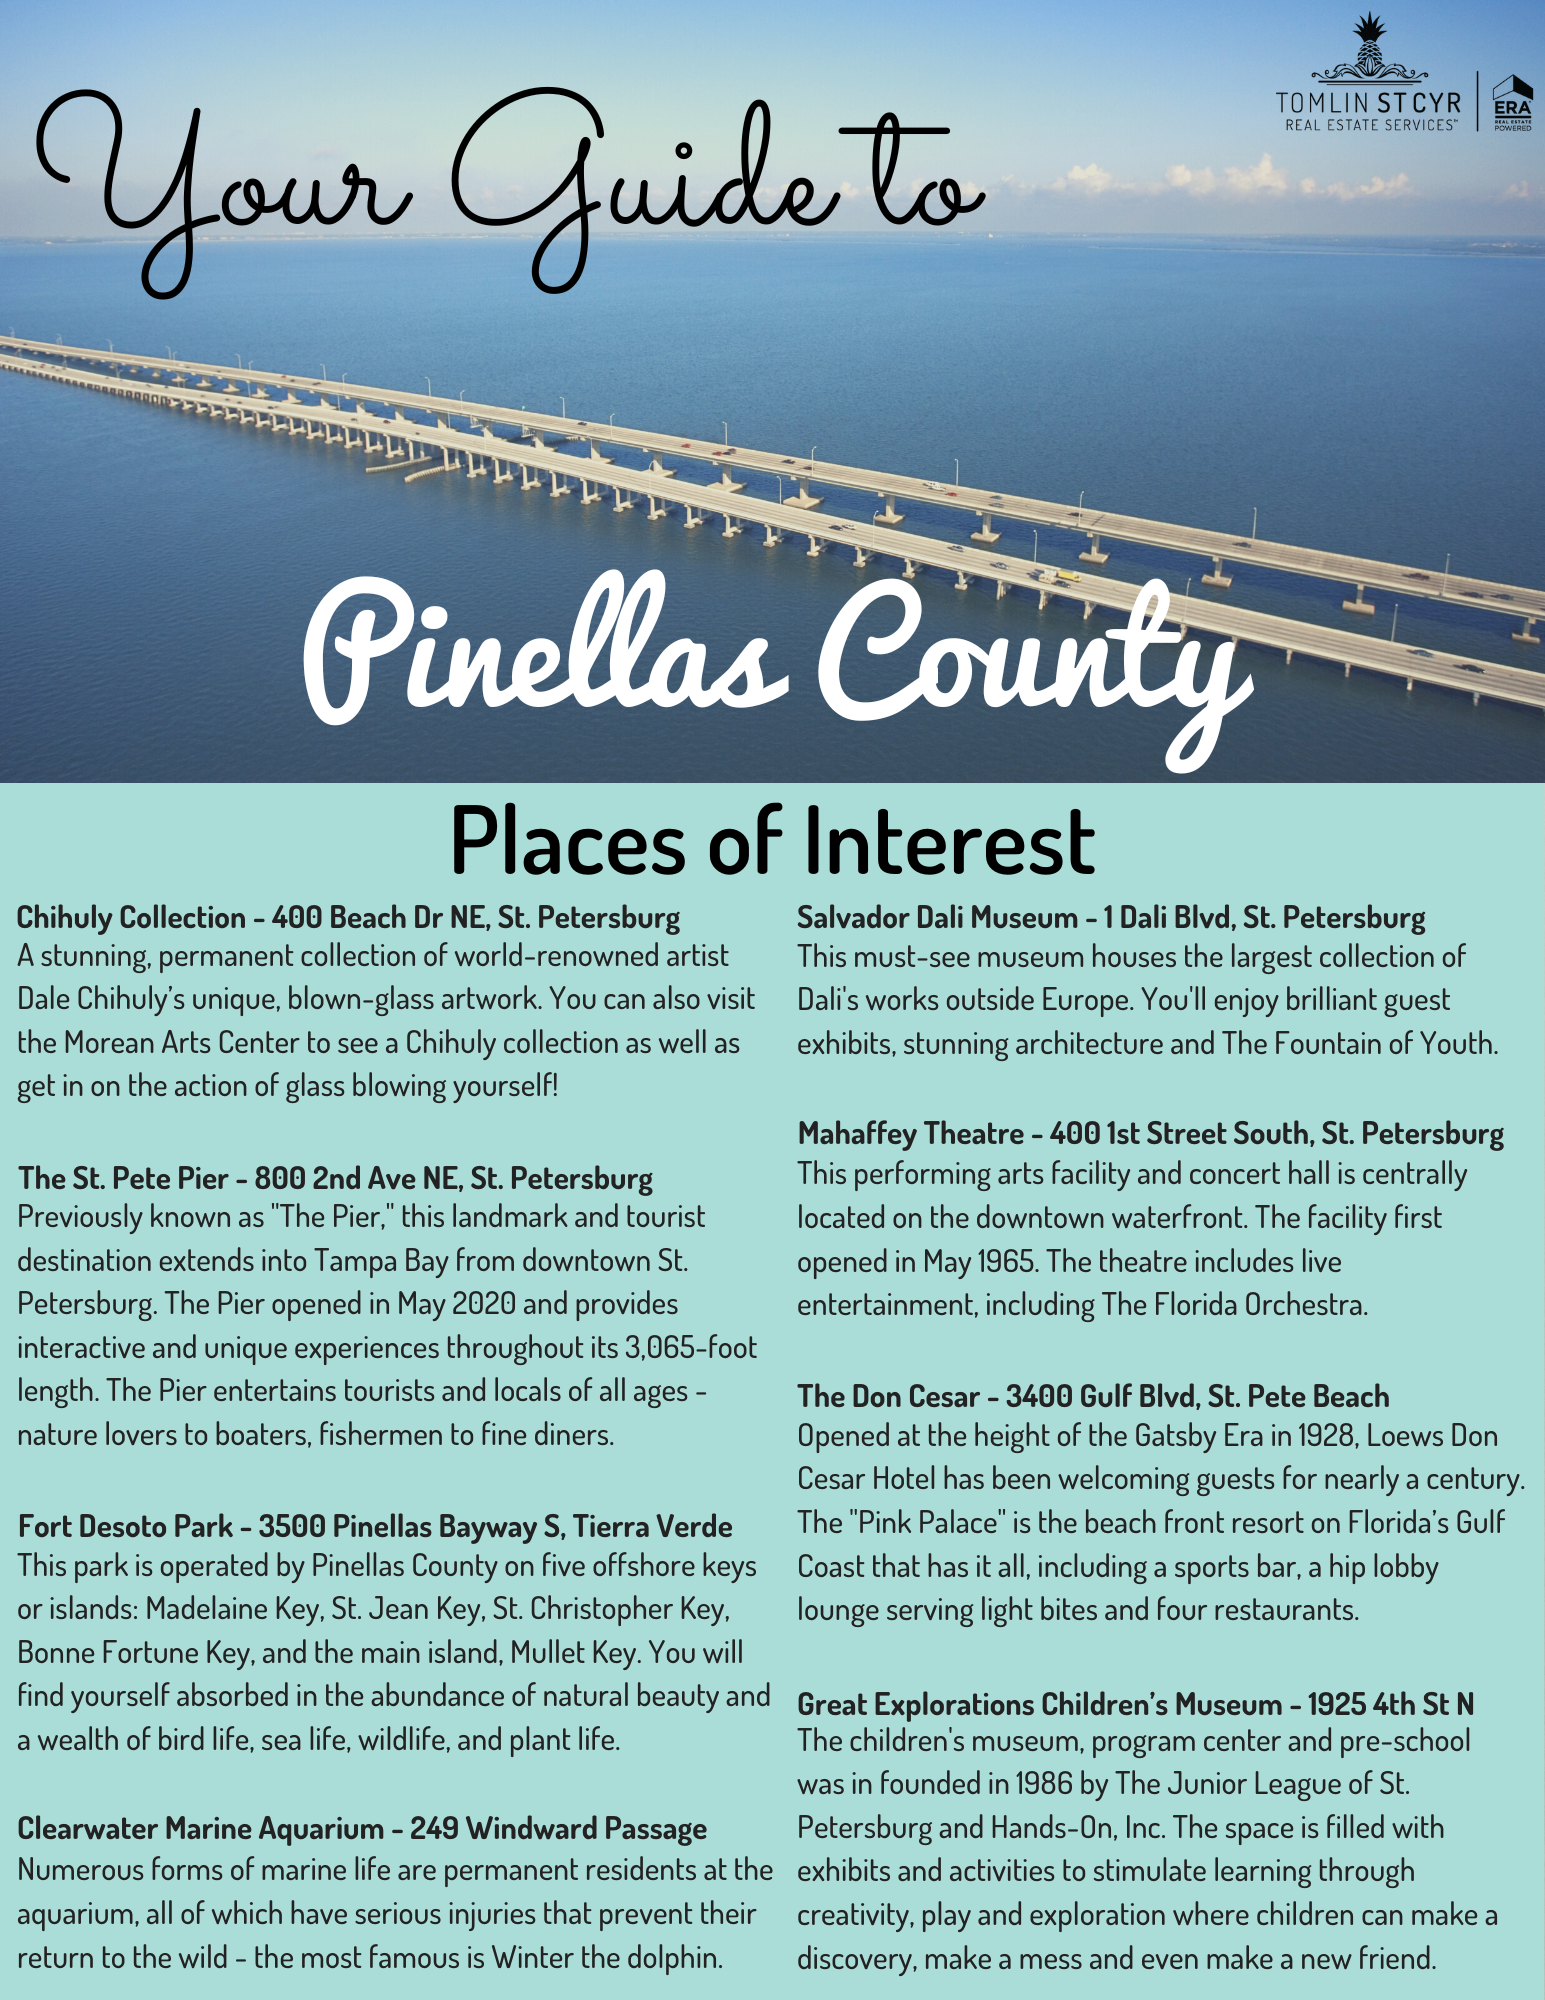 Your Guide to Pinellas County 2